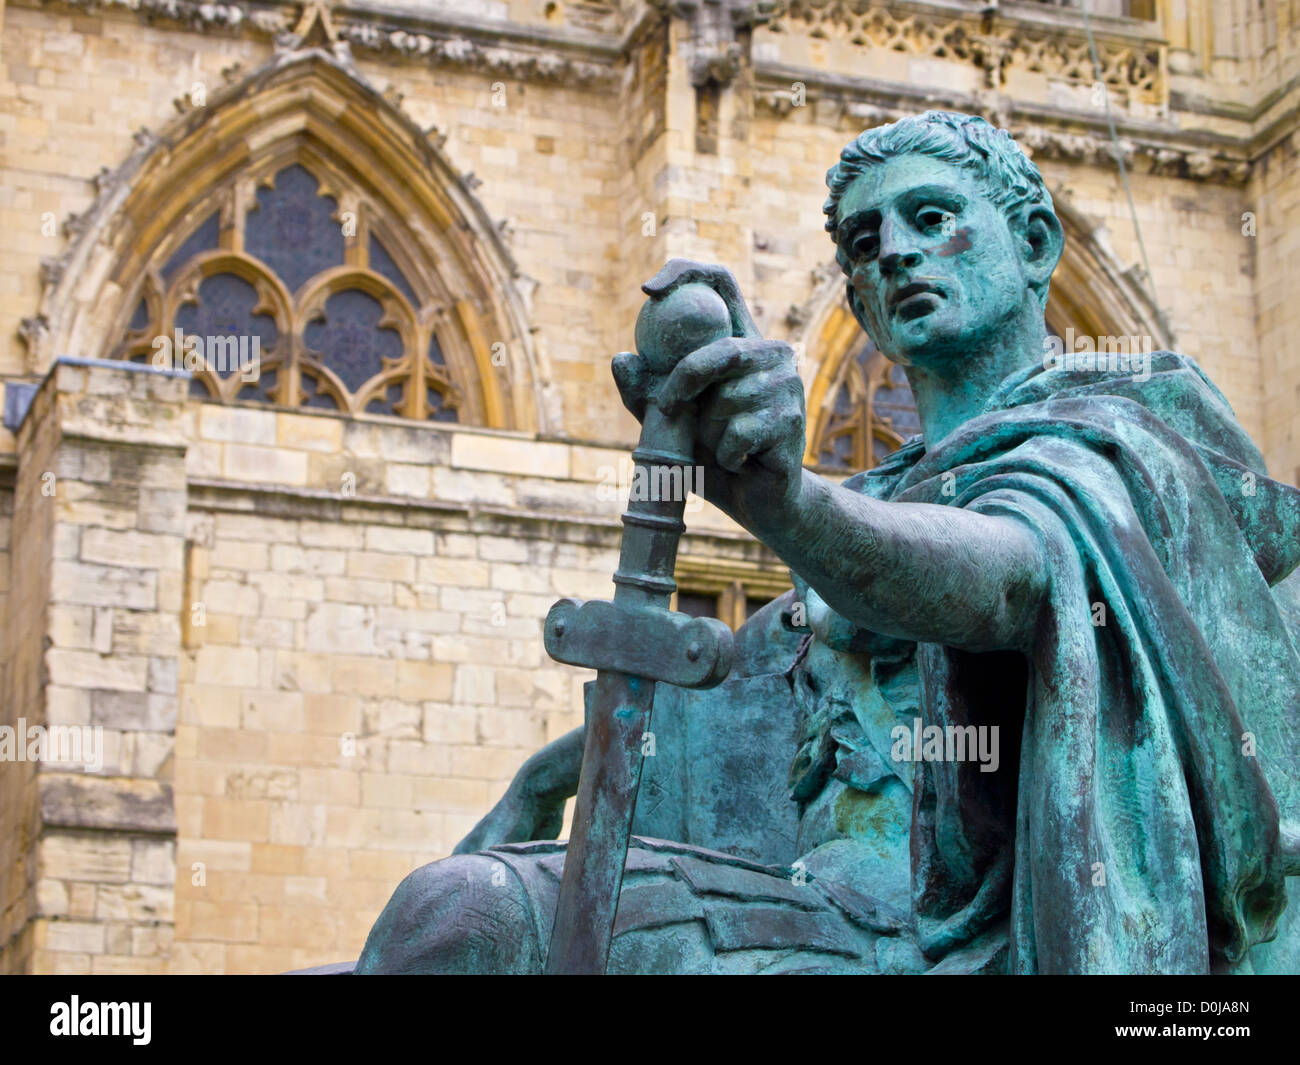 Statue of Roman Emperor Constantine the Great near the main entrance to York Minster. Stock Photo